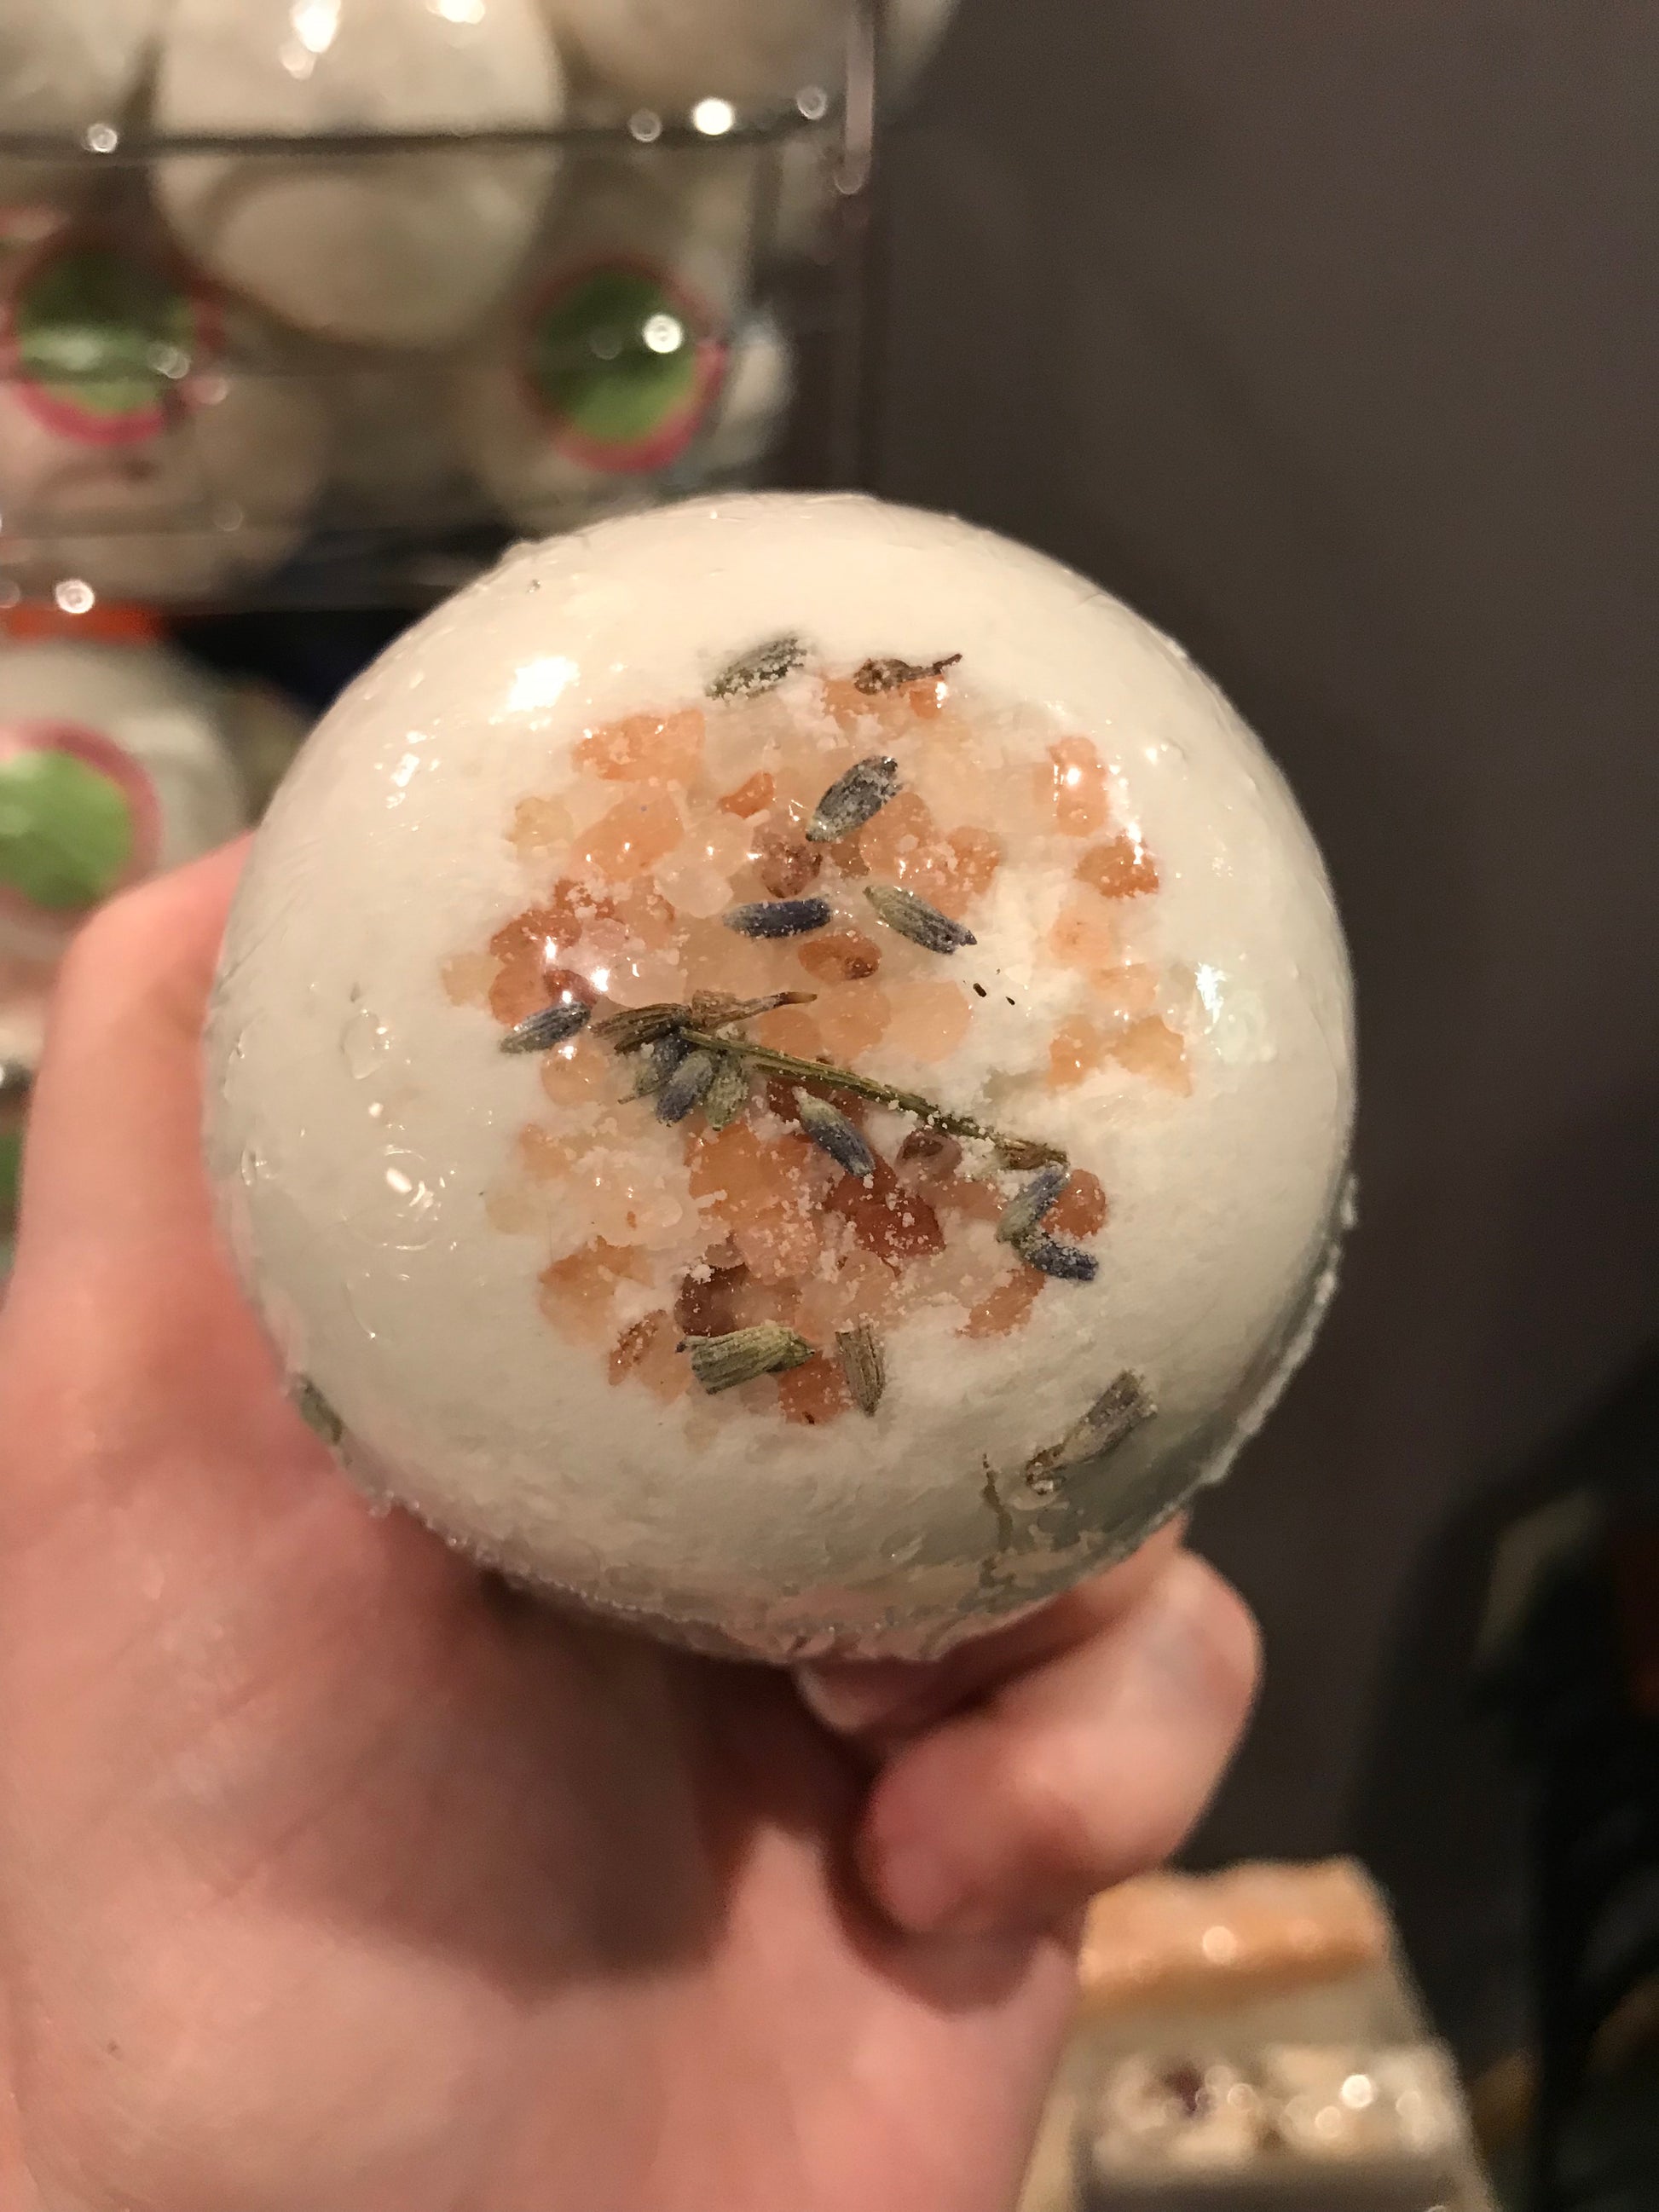 Mary Turner Spa Bath Bombs - Mary Turner Day Spa & Boutique